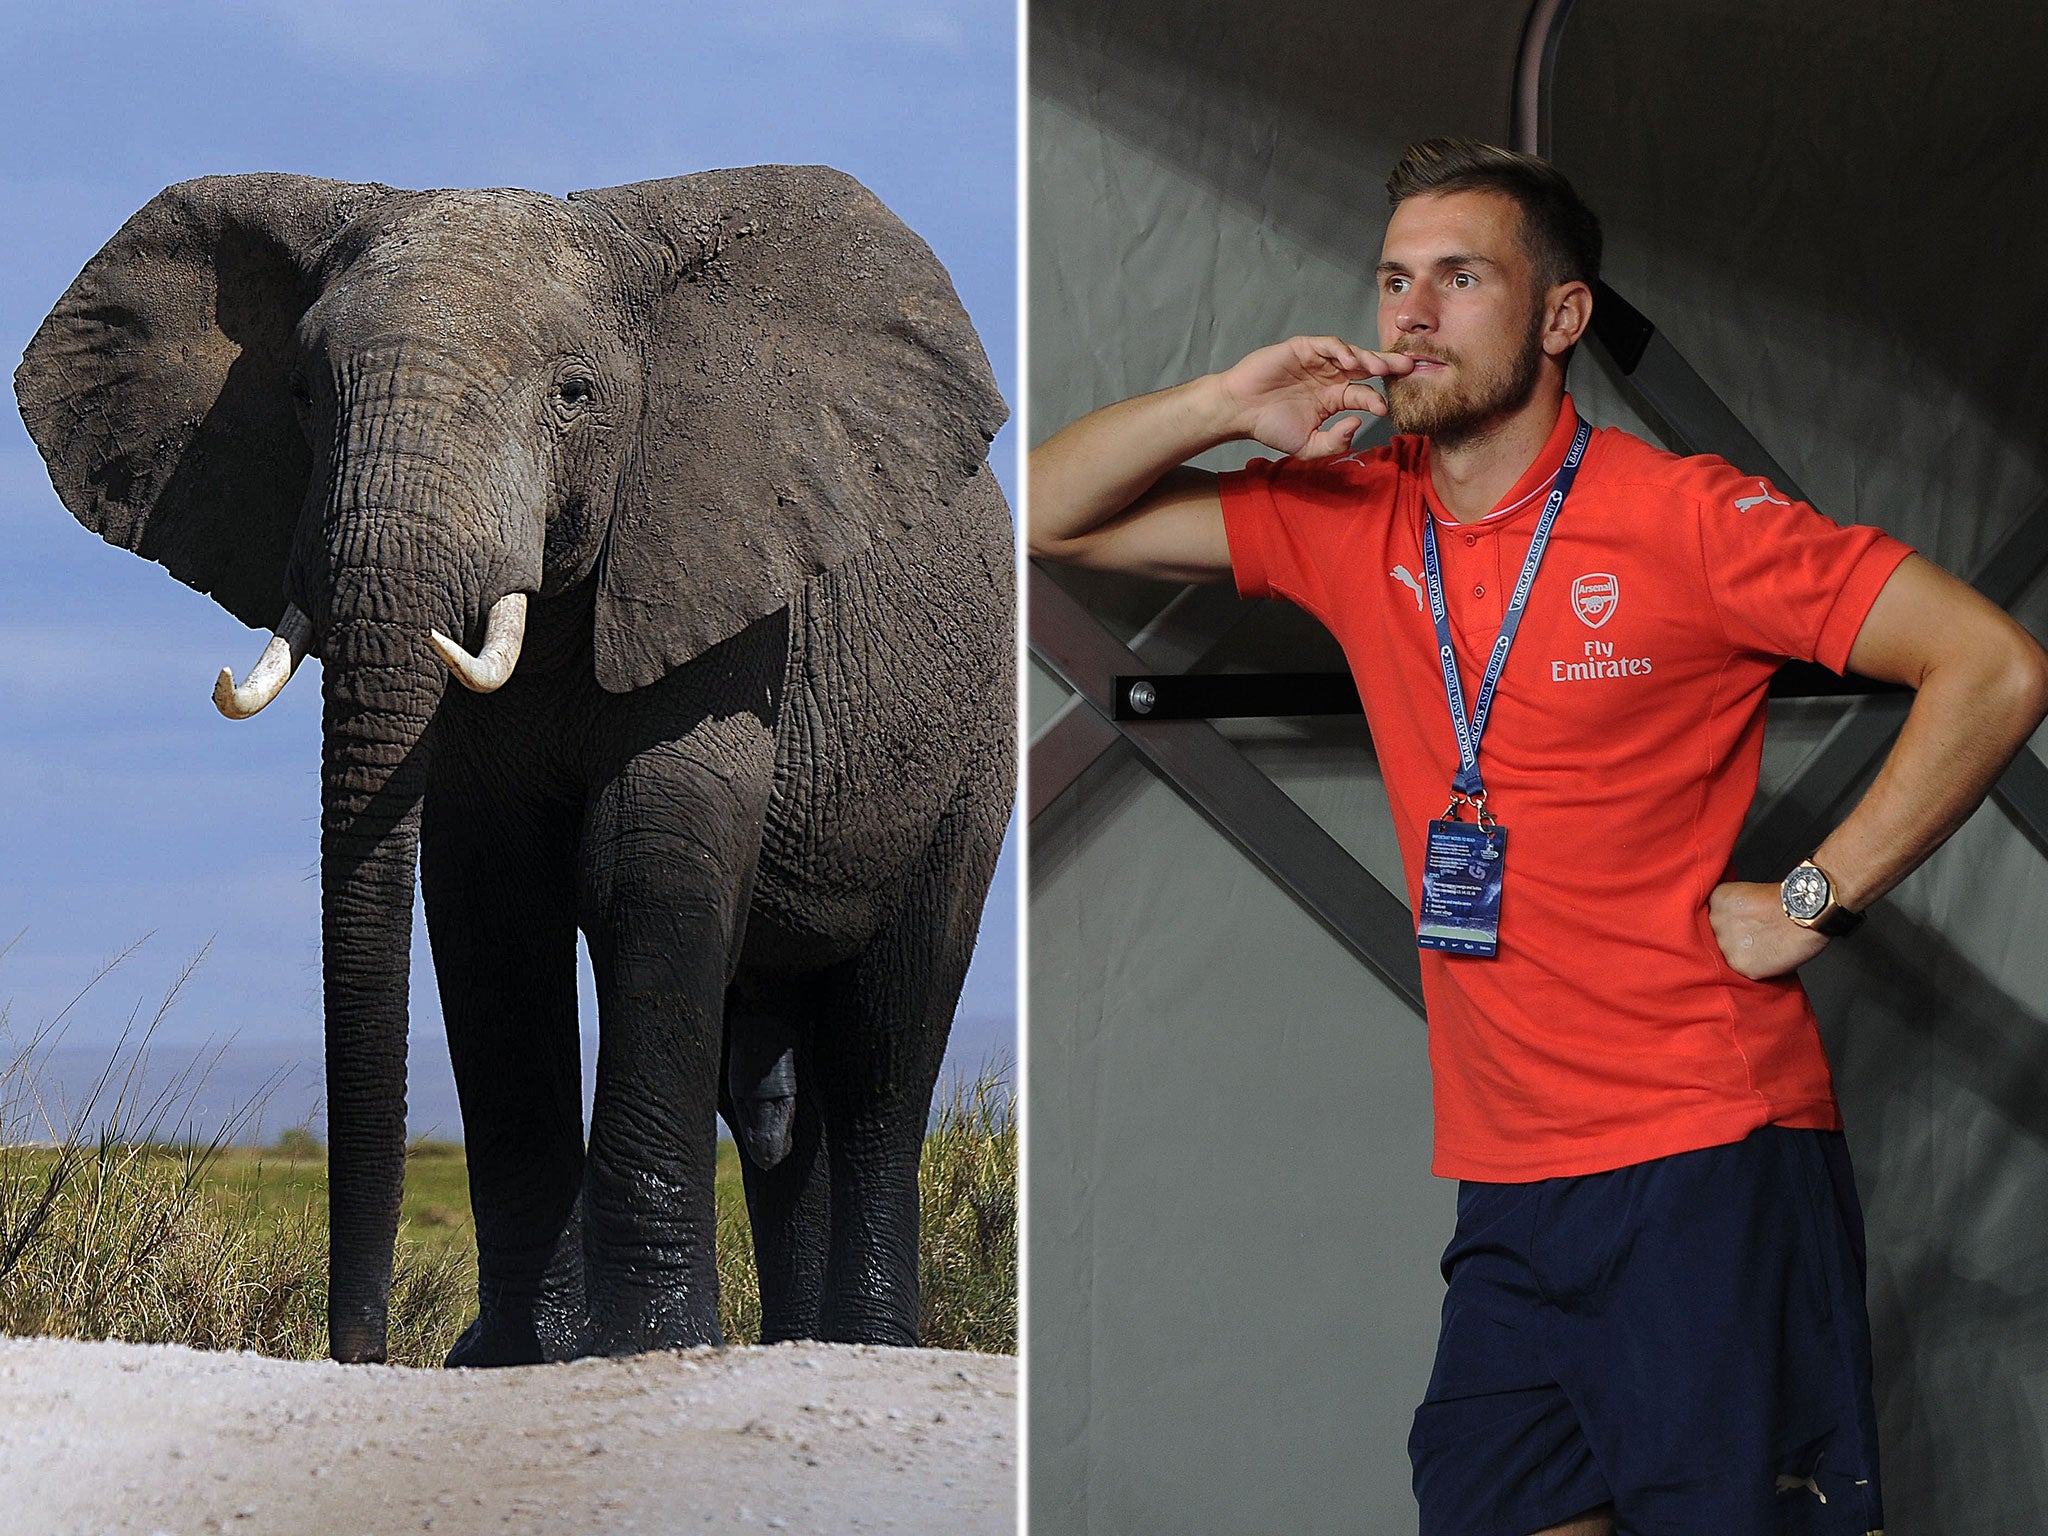 Aaron Ramsey wants to help ave endangered animals in Africa